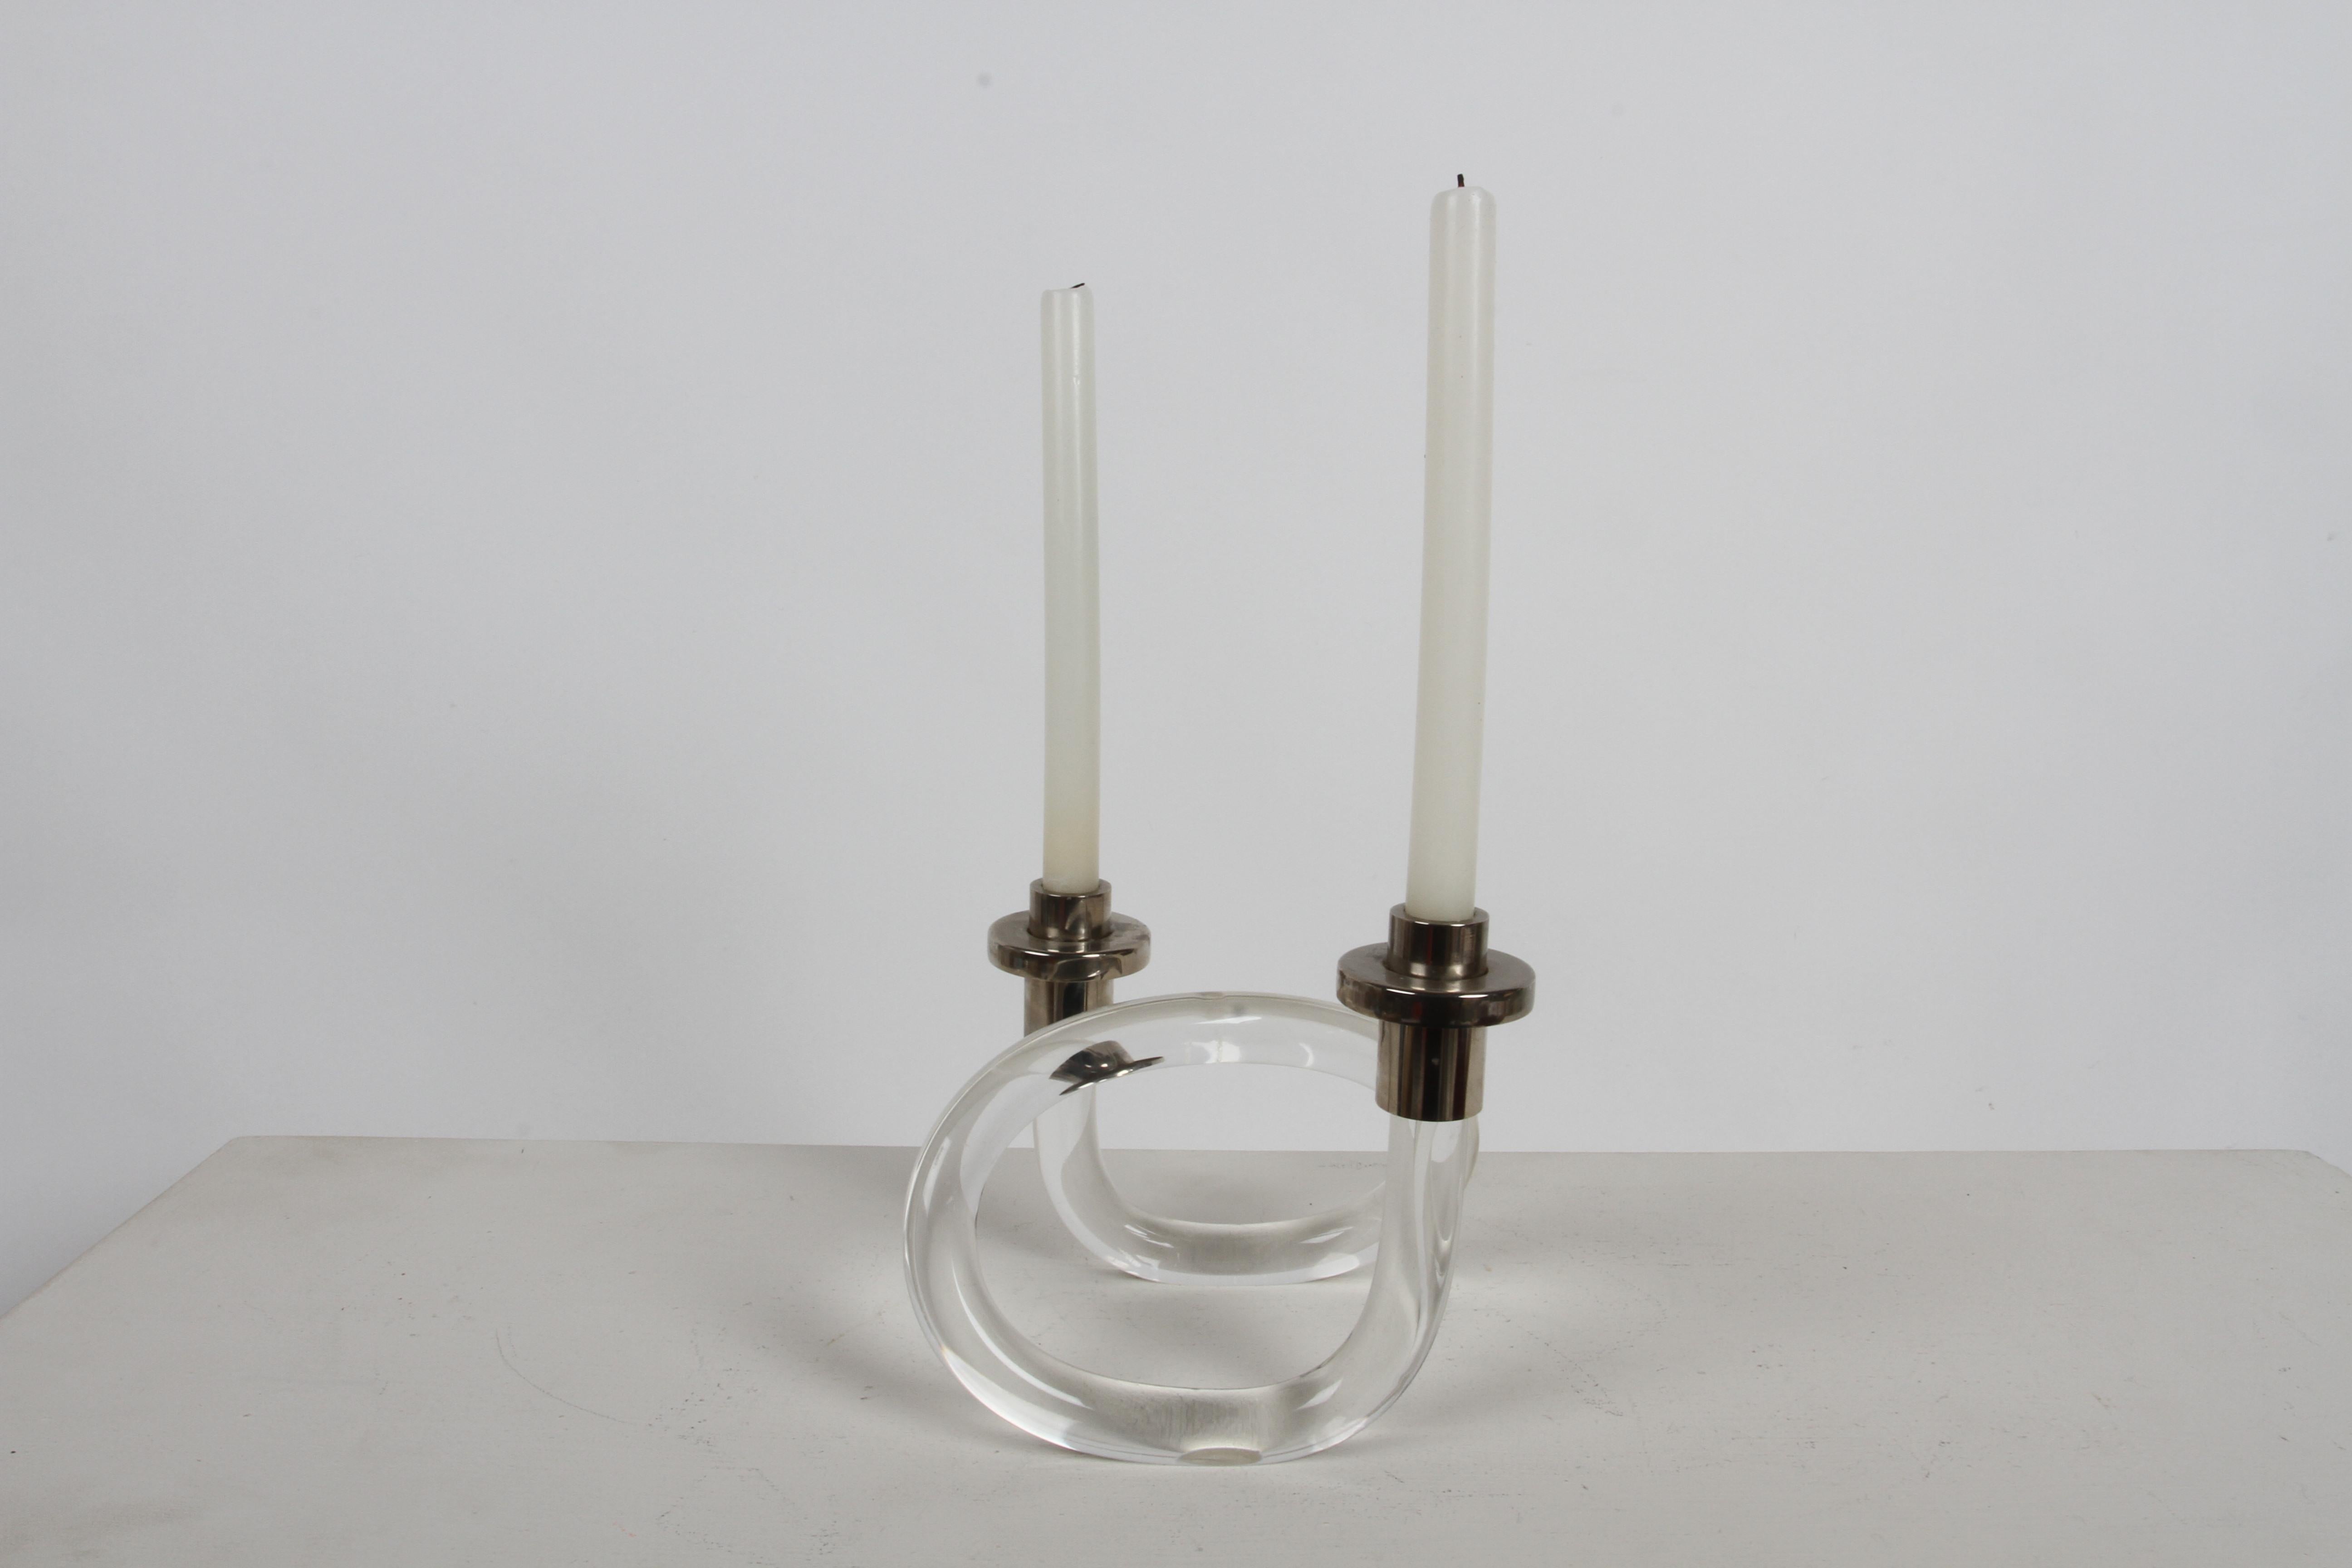 Classic Dorothy Thorpe twisted Lucite candlestick with nickel plated candle holders. Set does show very few internal age cracks, common with lucite of this age. Excludes candles. 